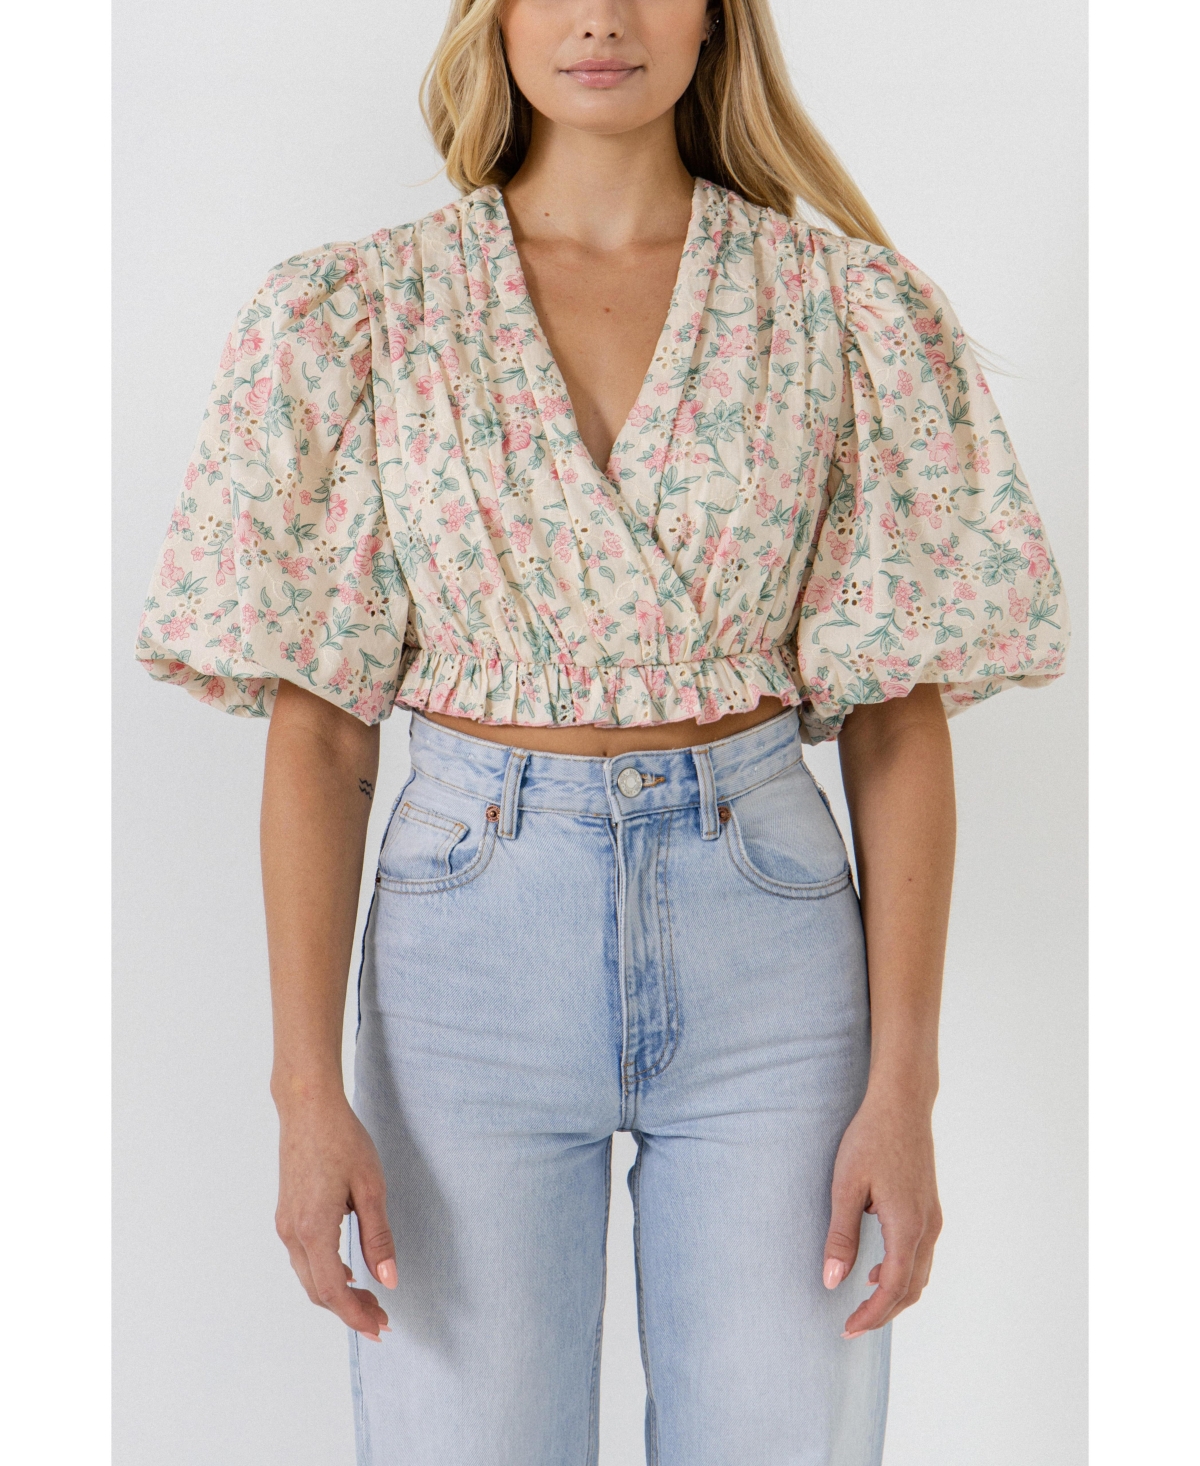 Women's Floral Embroidered Blouson Top - Pink